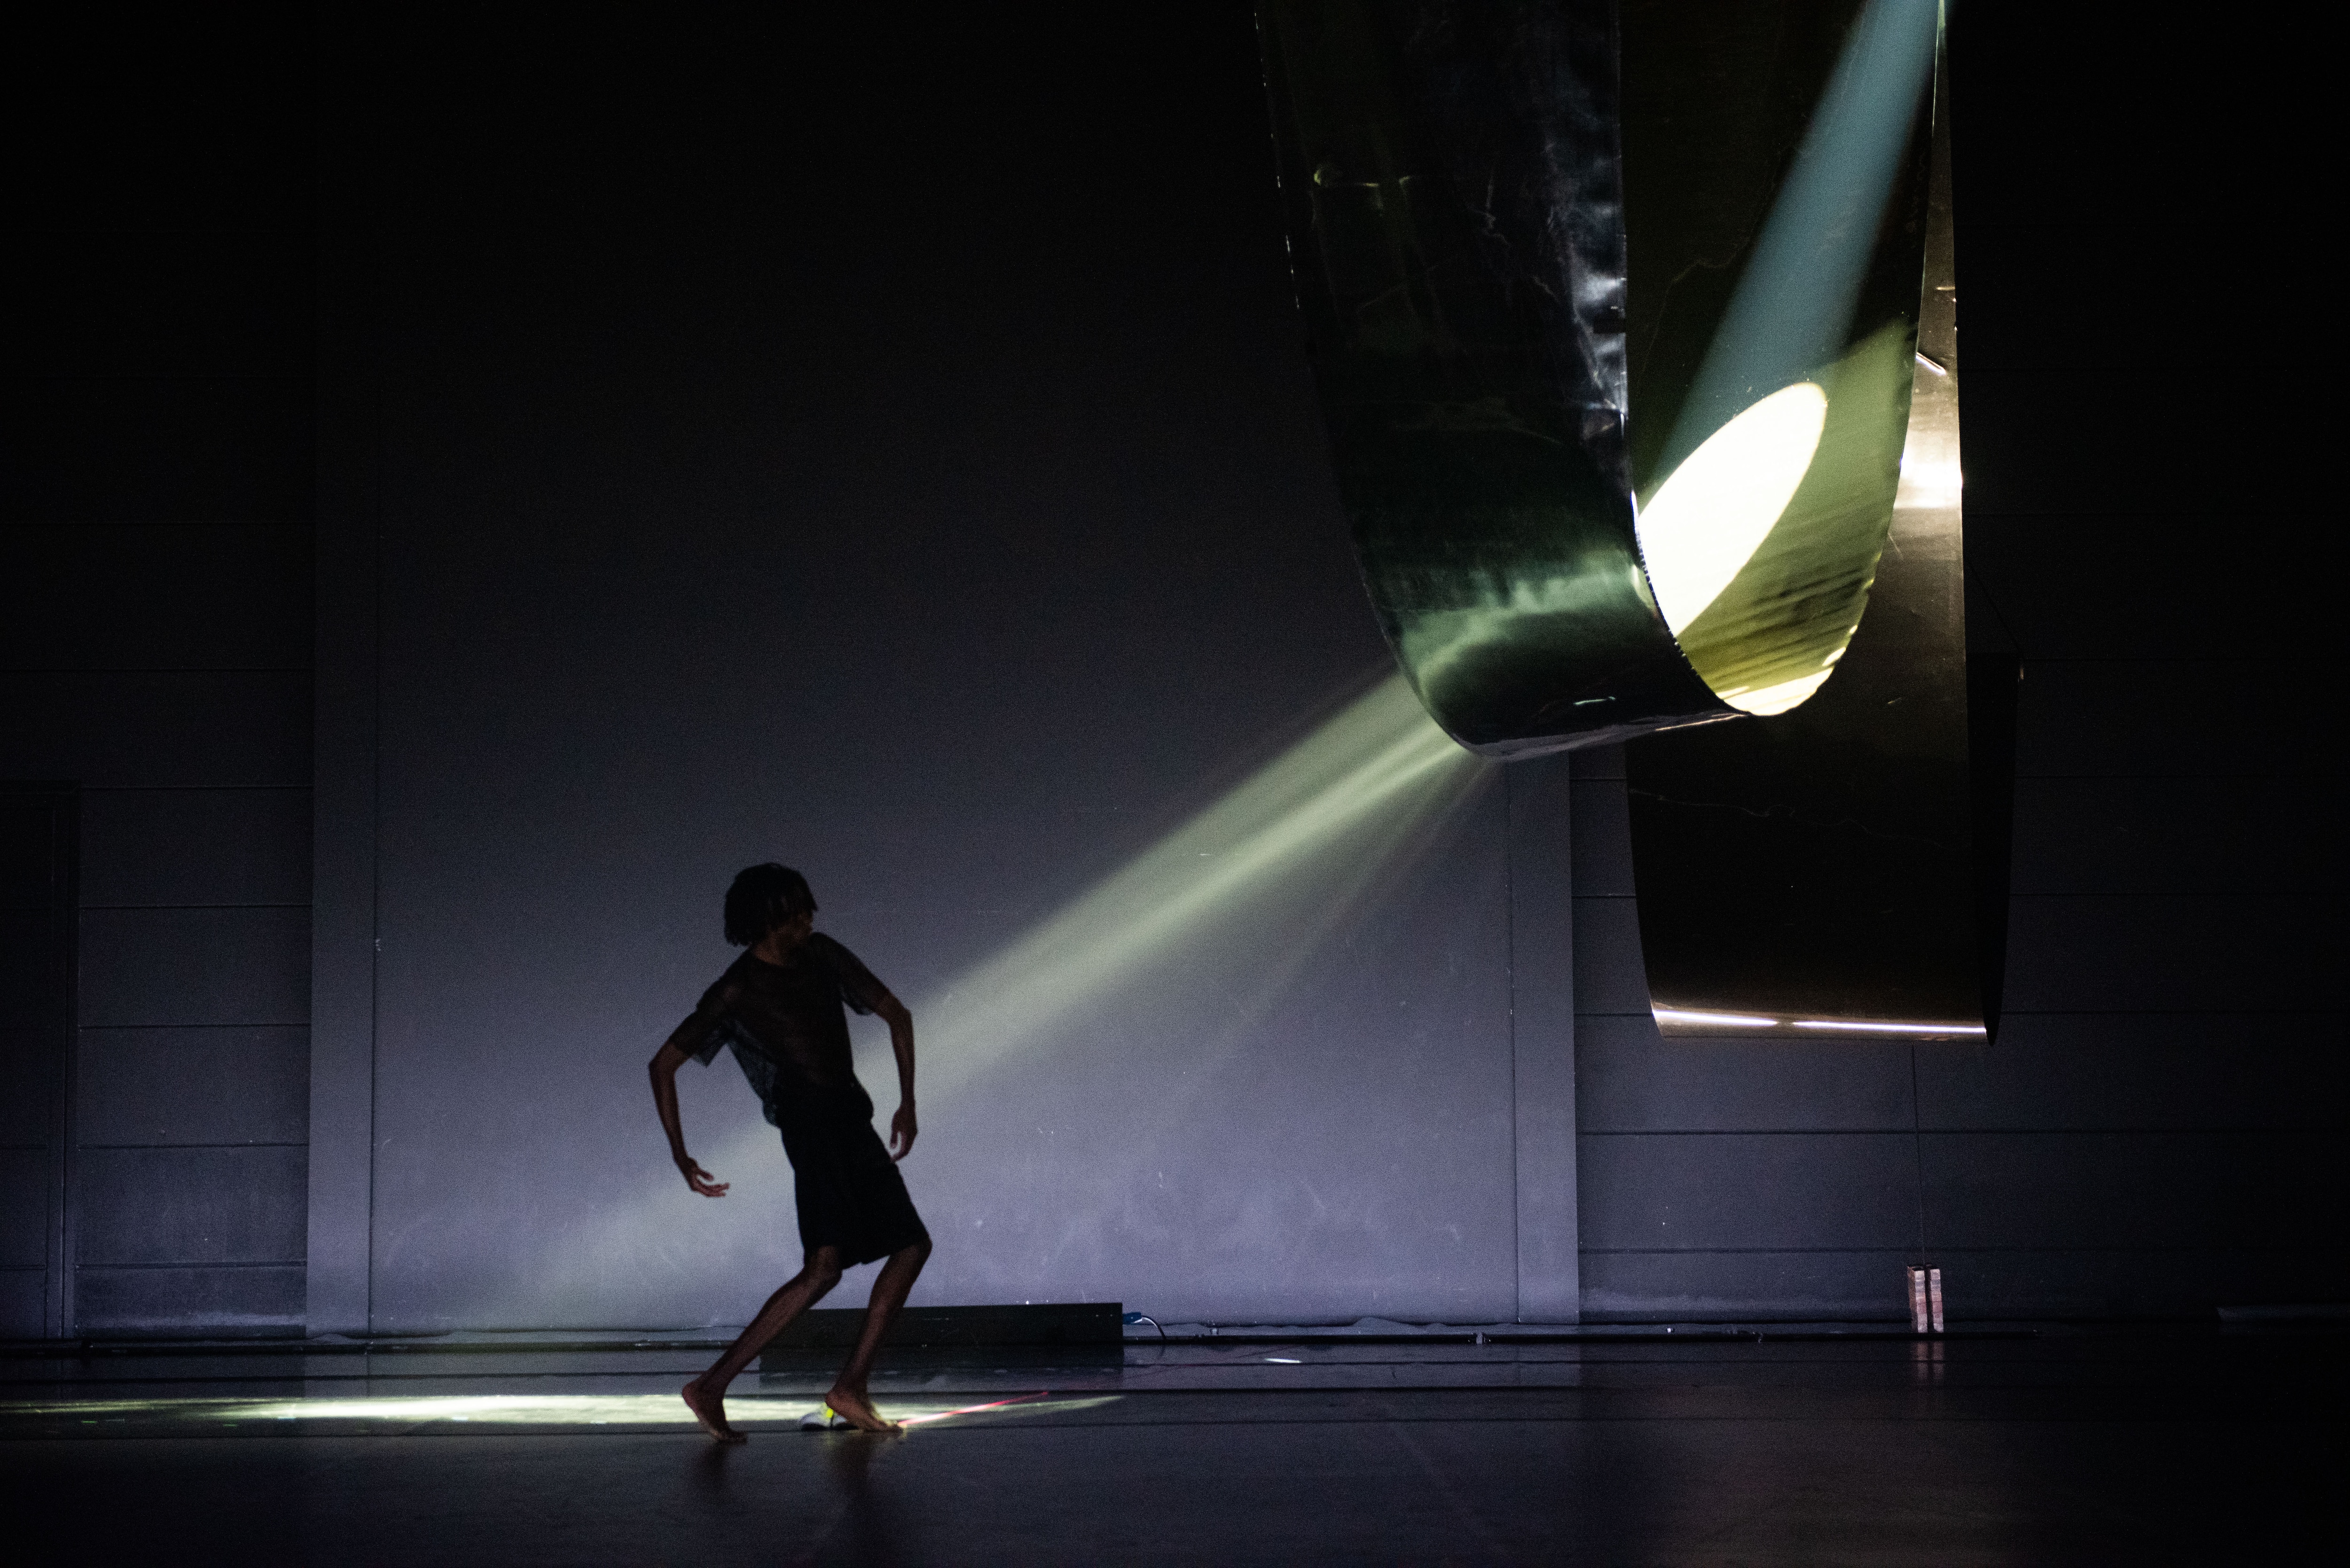 Dancer in profile on a dark stage facing a structure diffusing a ray of light